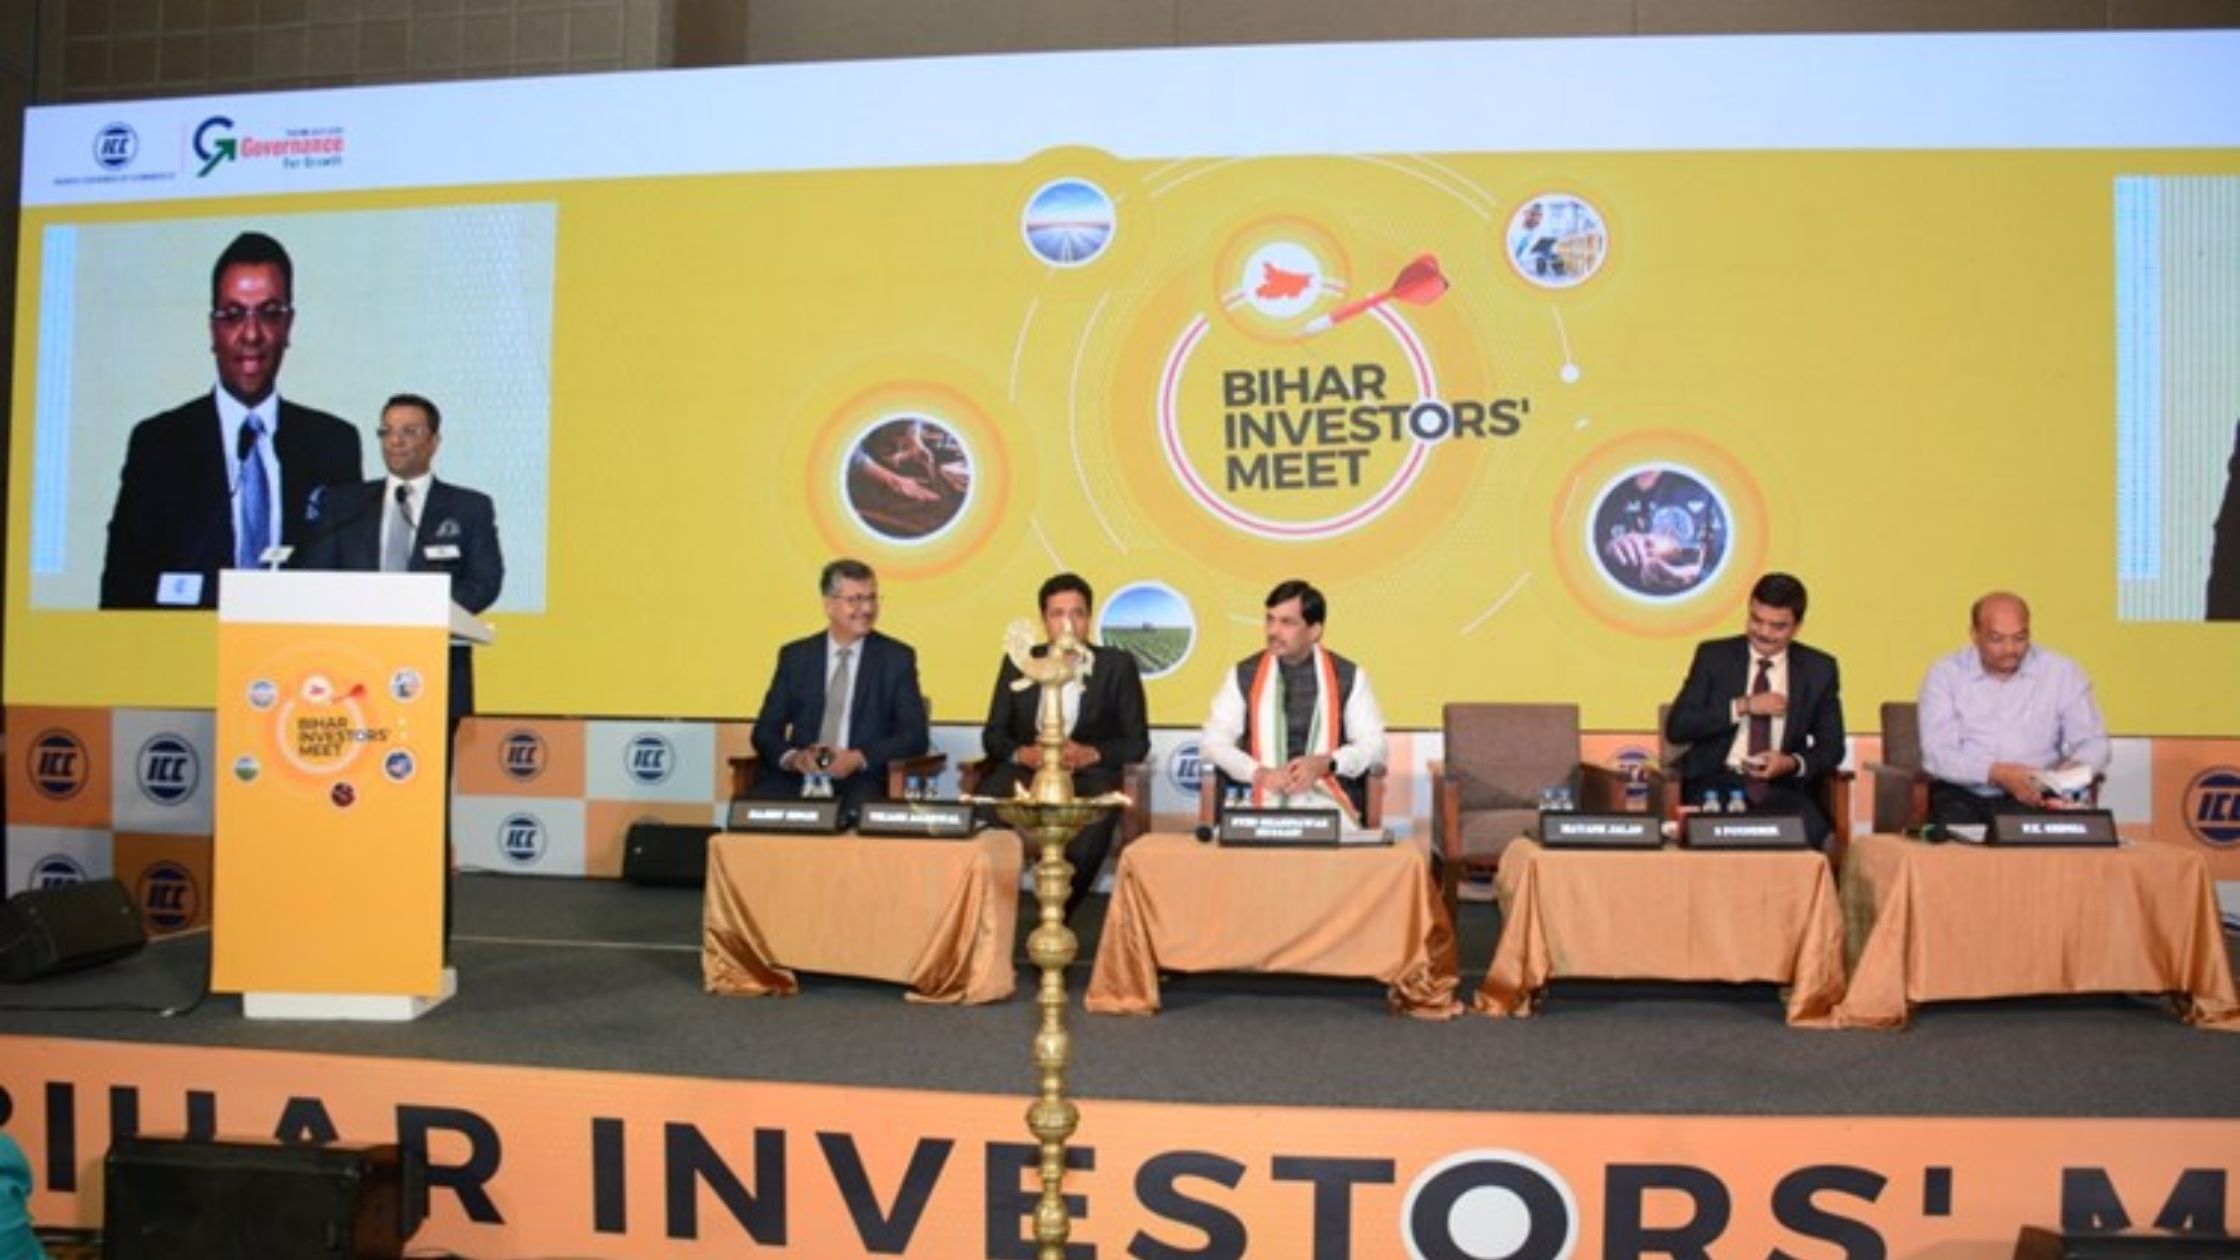 Keventers Agro And JIS Group Will Invest In Bihar For Rs 900 Crore